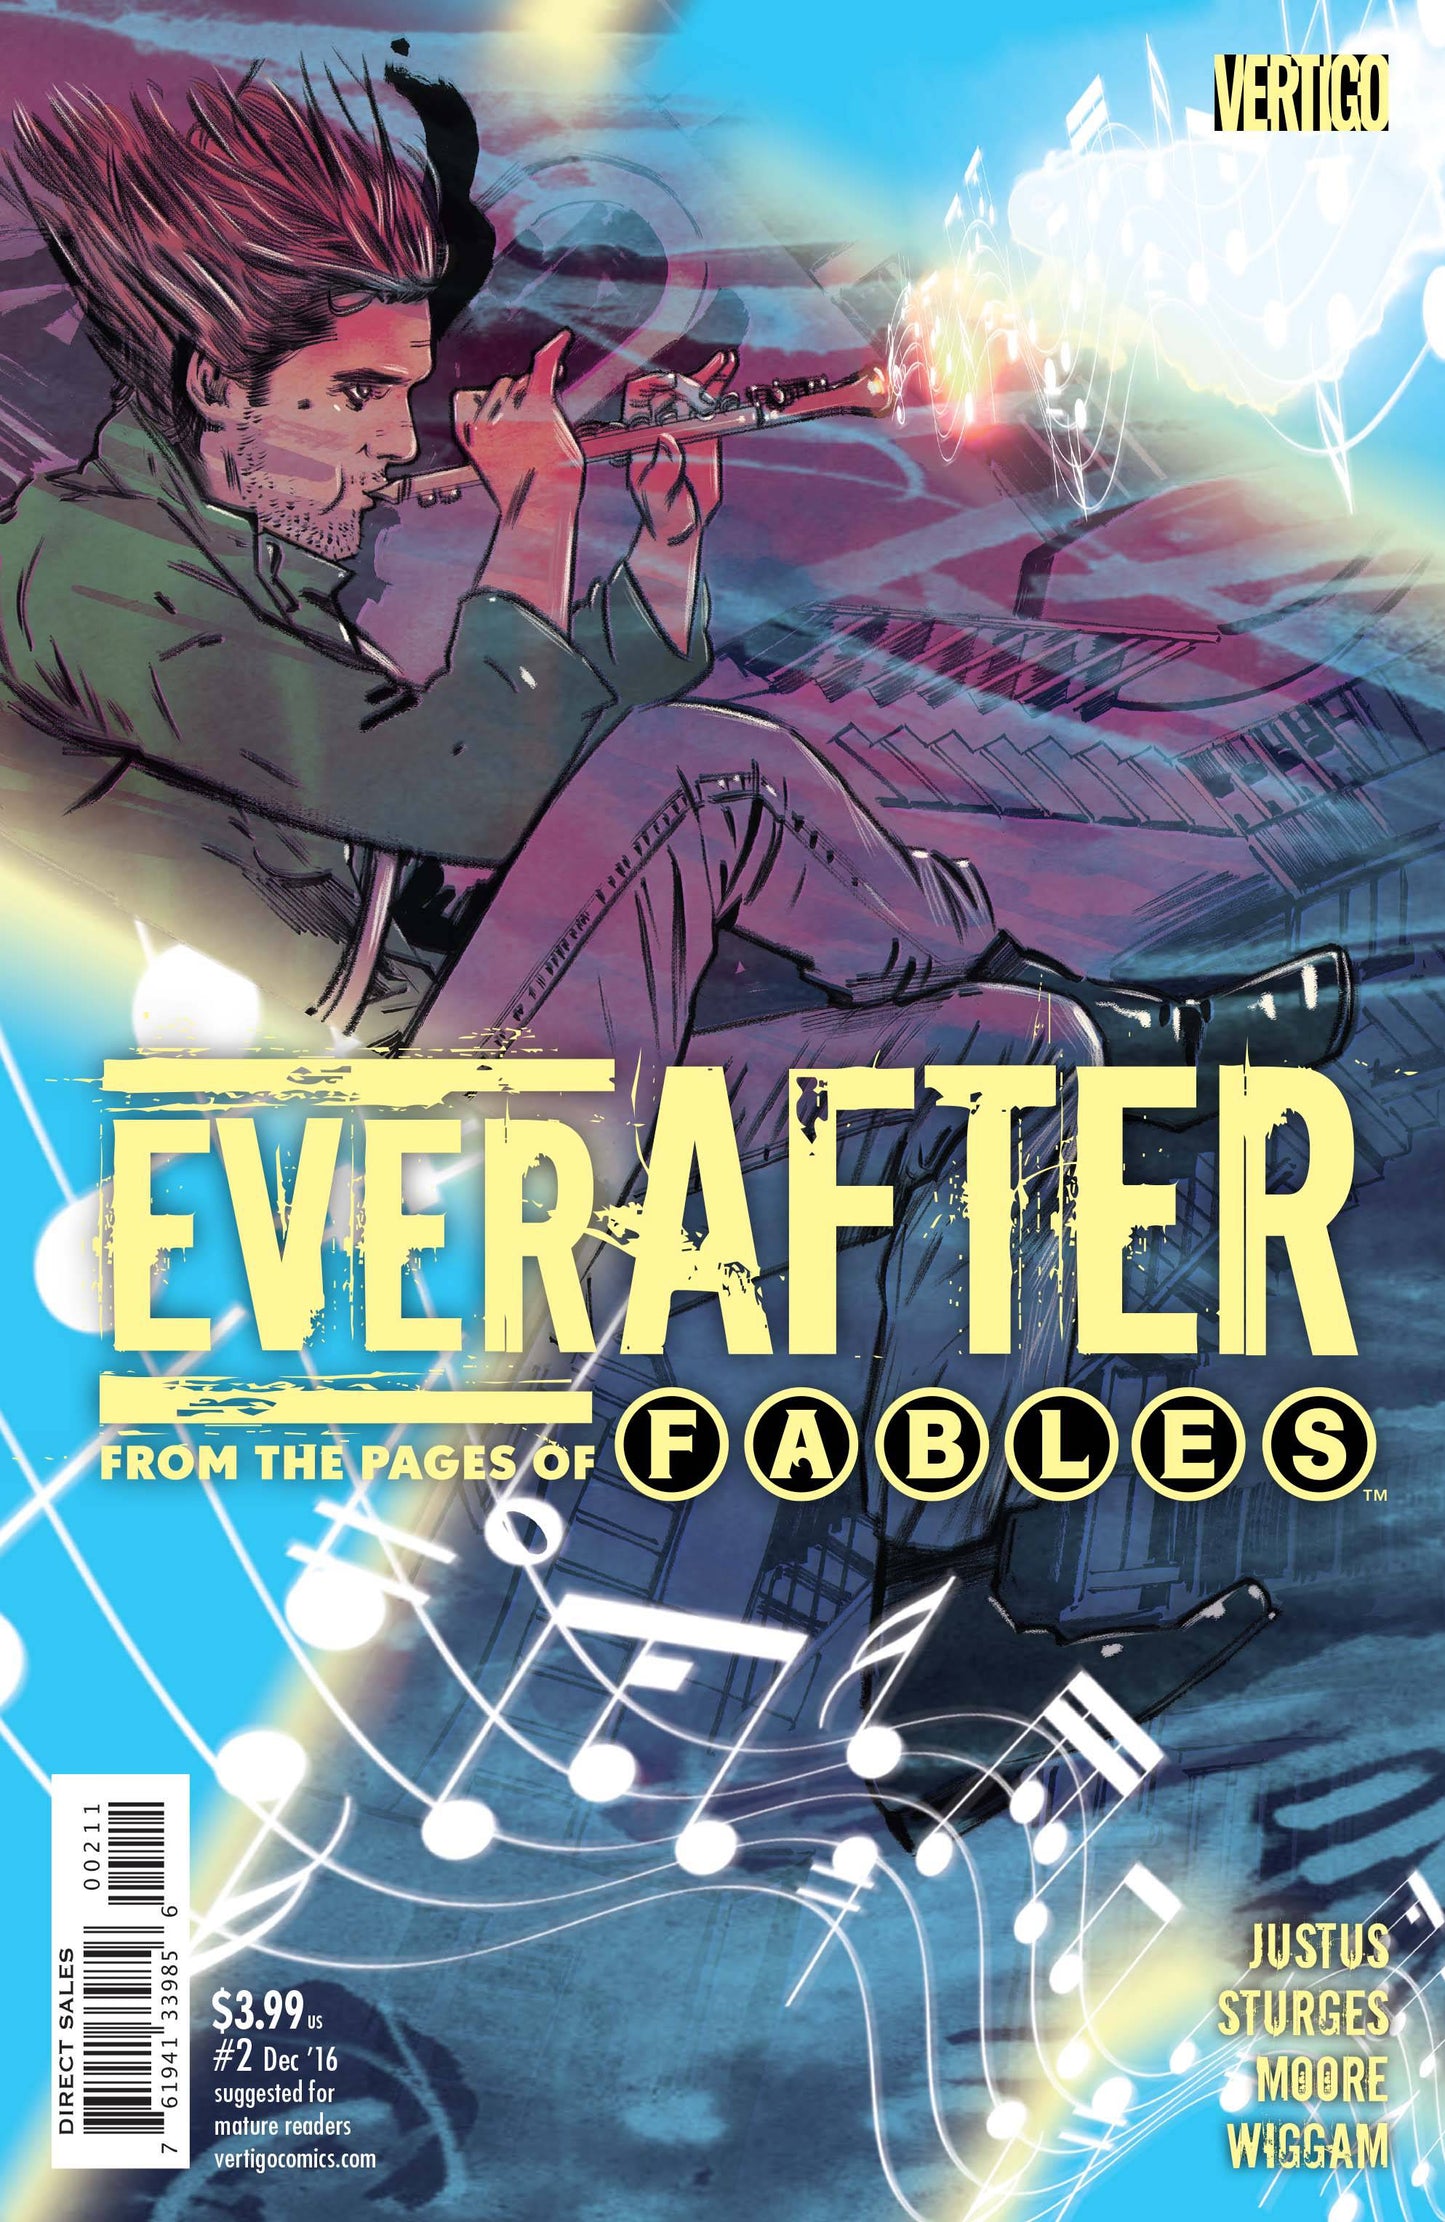 Everafter From The Pages Of Fables #2 DC Vertigo 2016 Tula Lotay Lilah Sturges